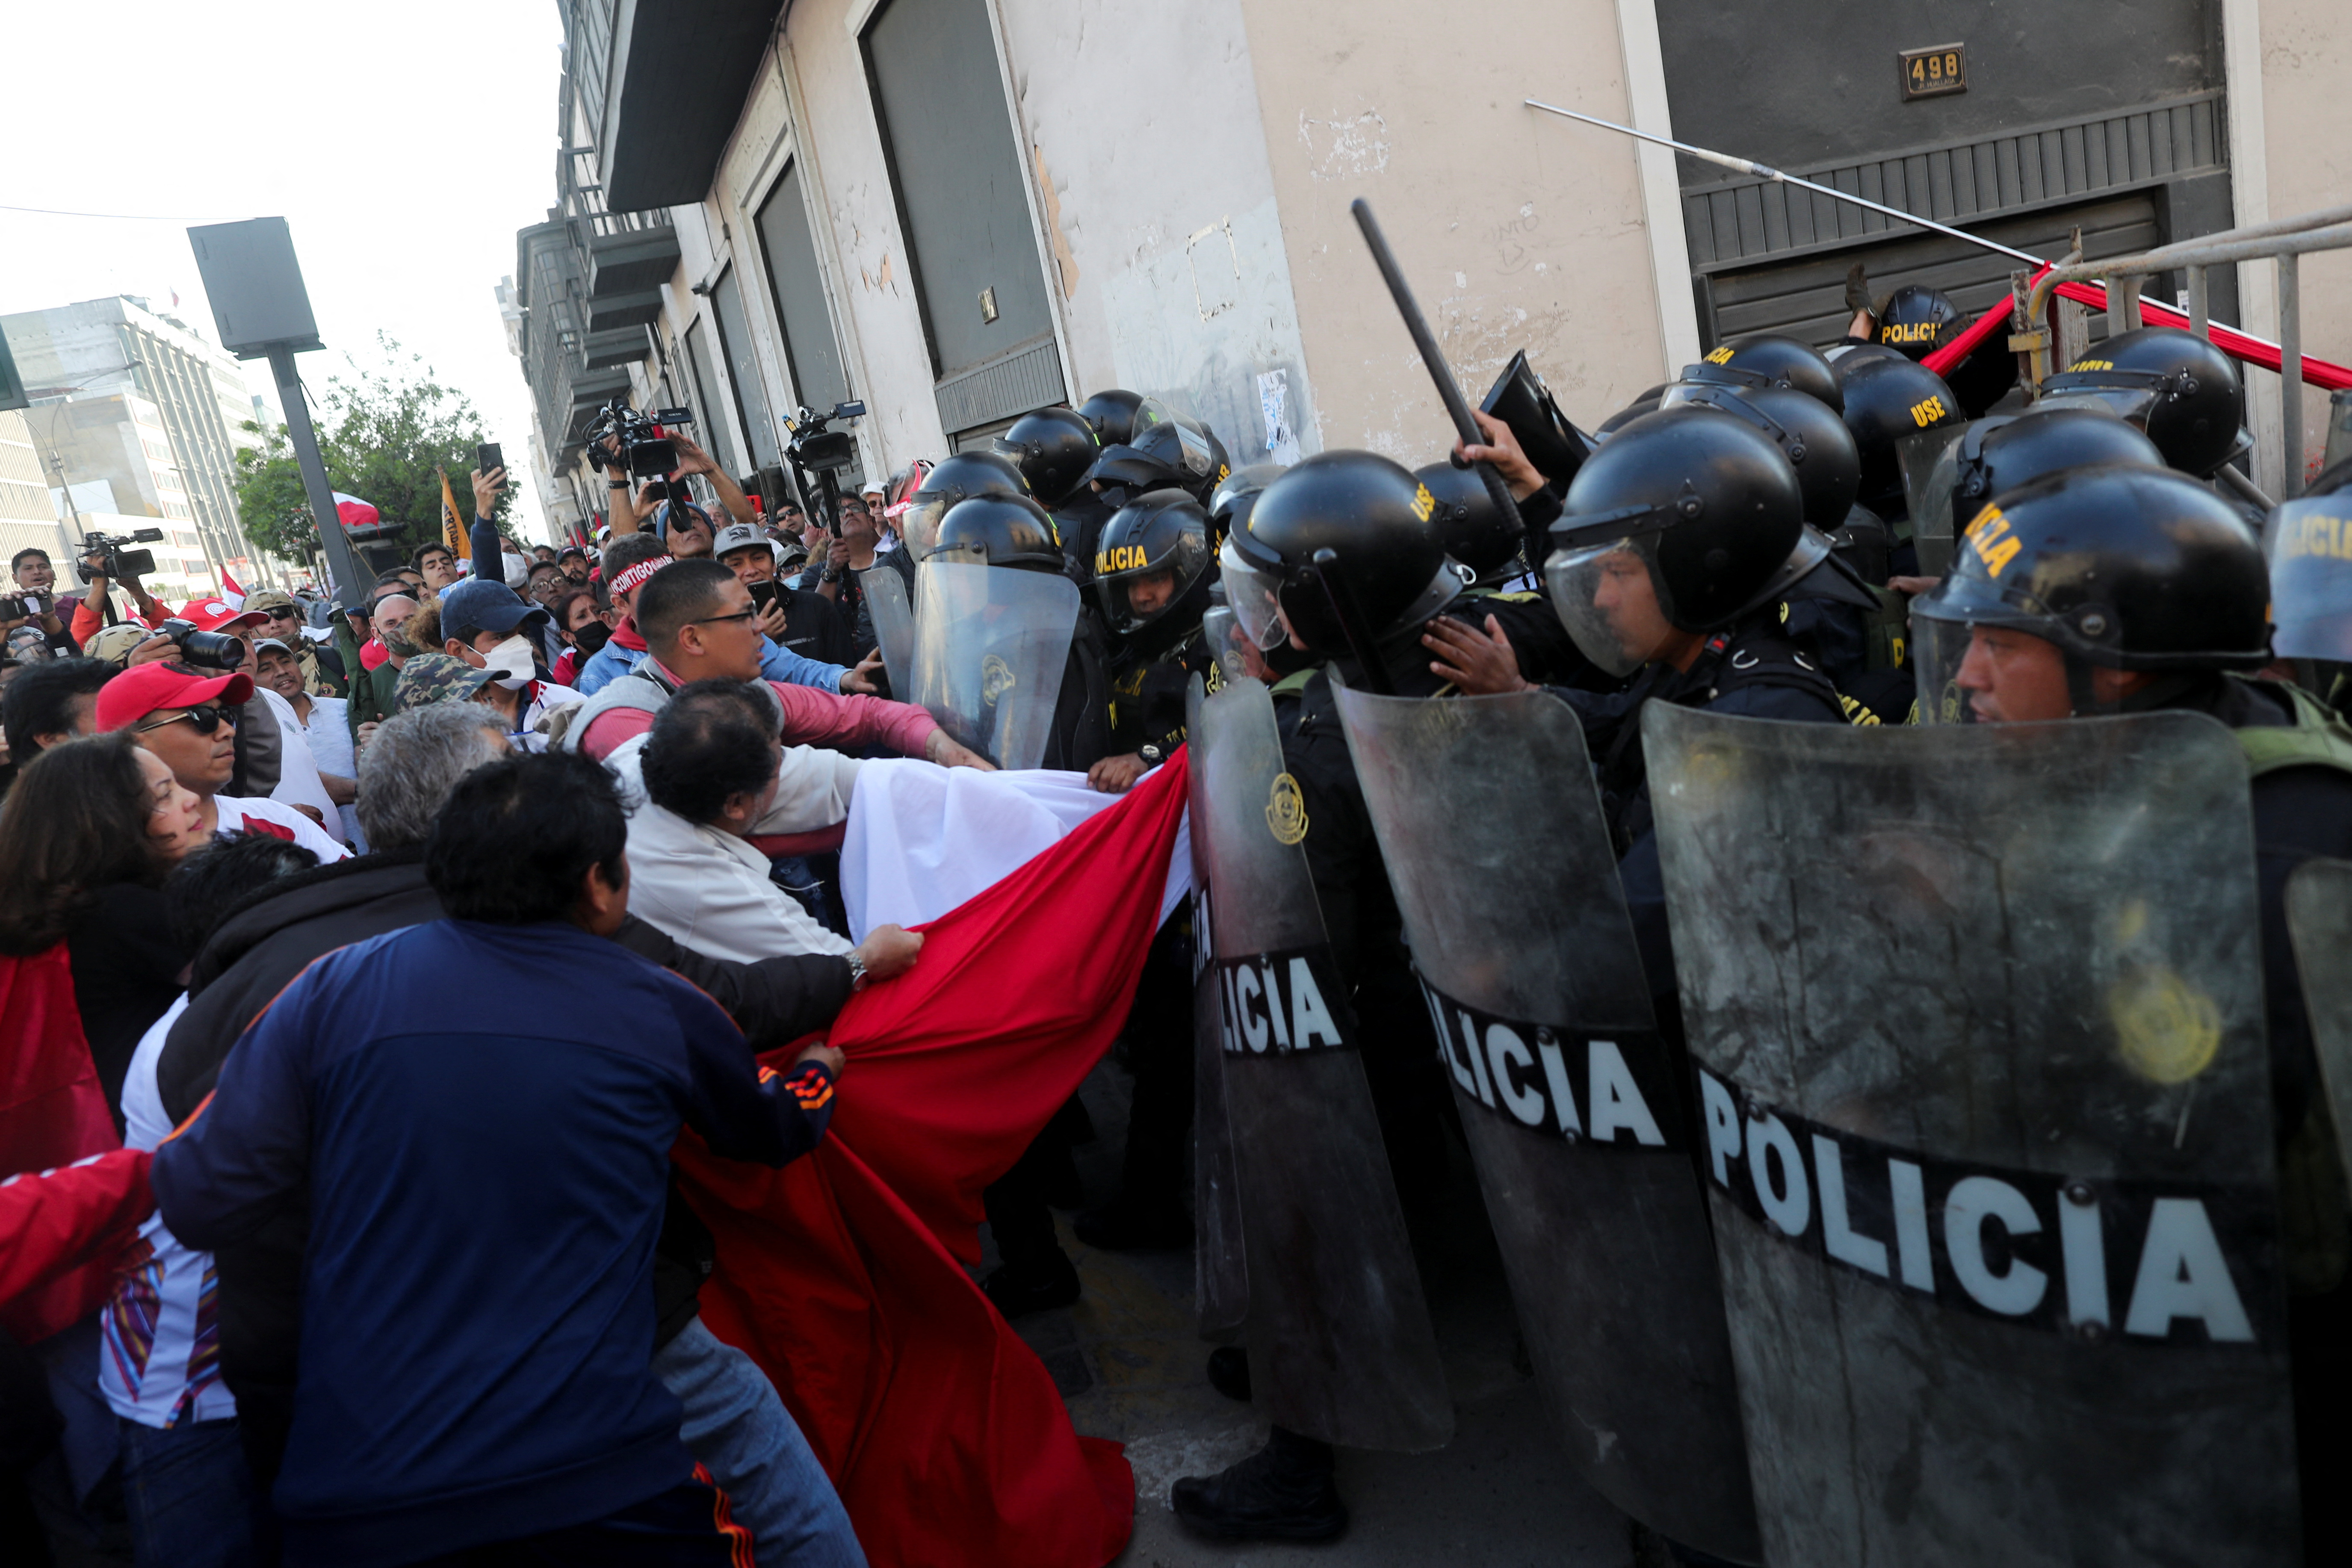 People clash with police as they protest against the government of Peru's President Pedro Castillo, in Lima, Peru November 5, 2022. REUTERS/Sebastian Castaneda